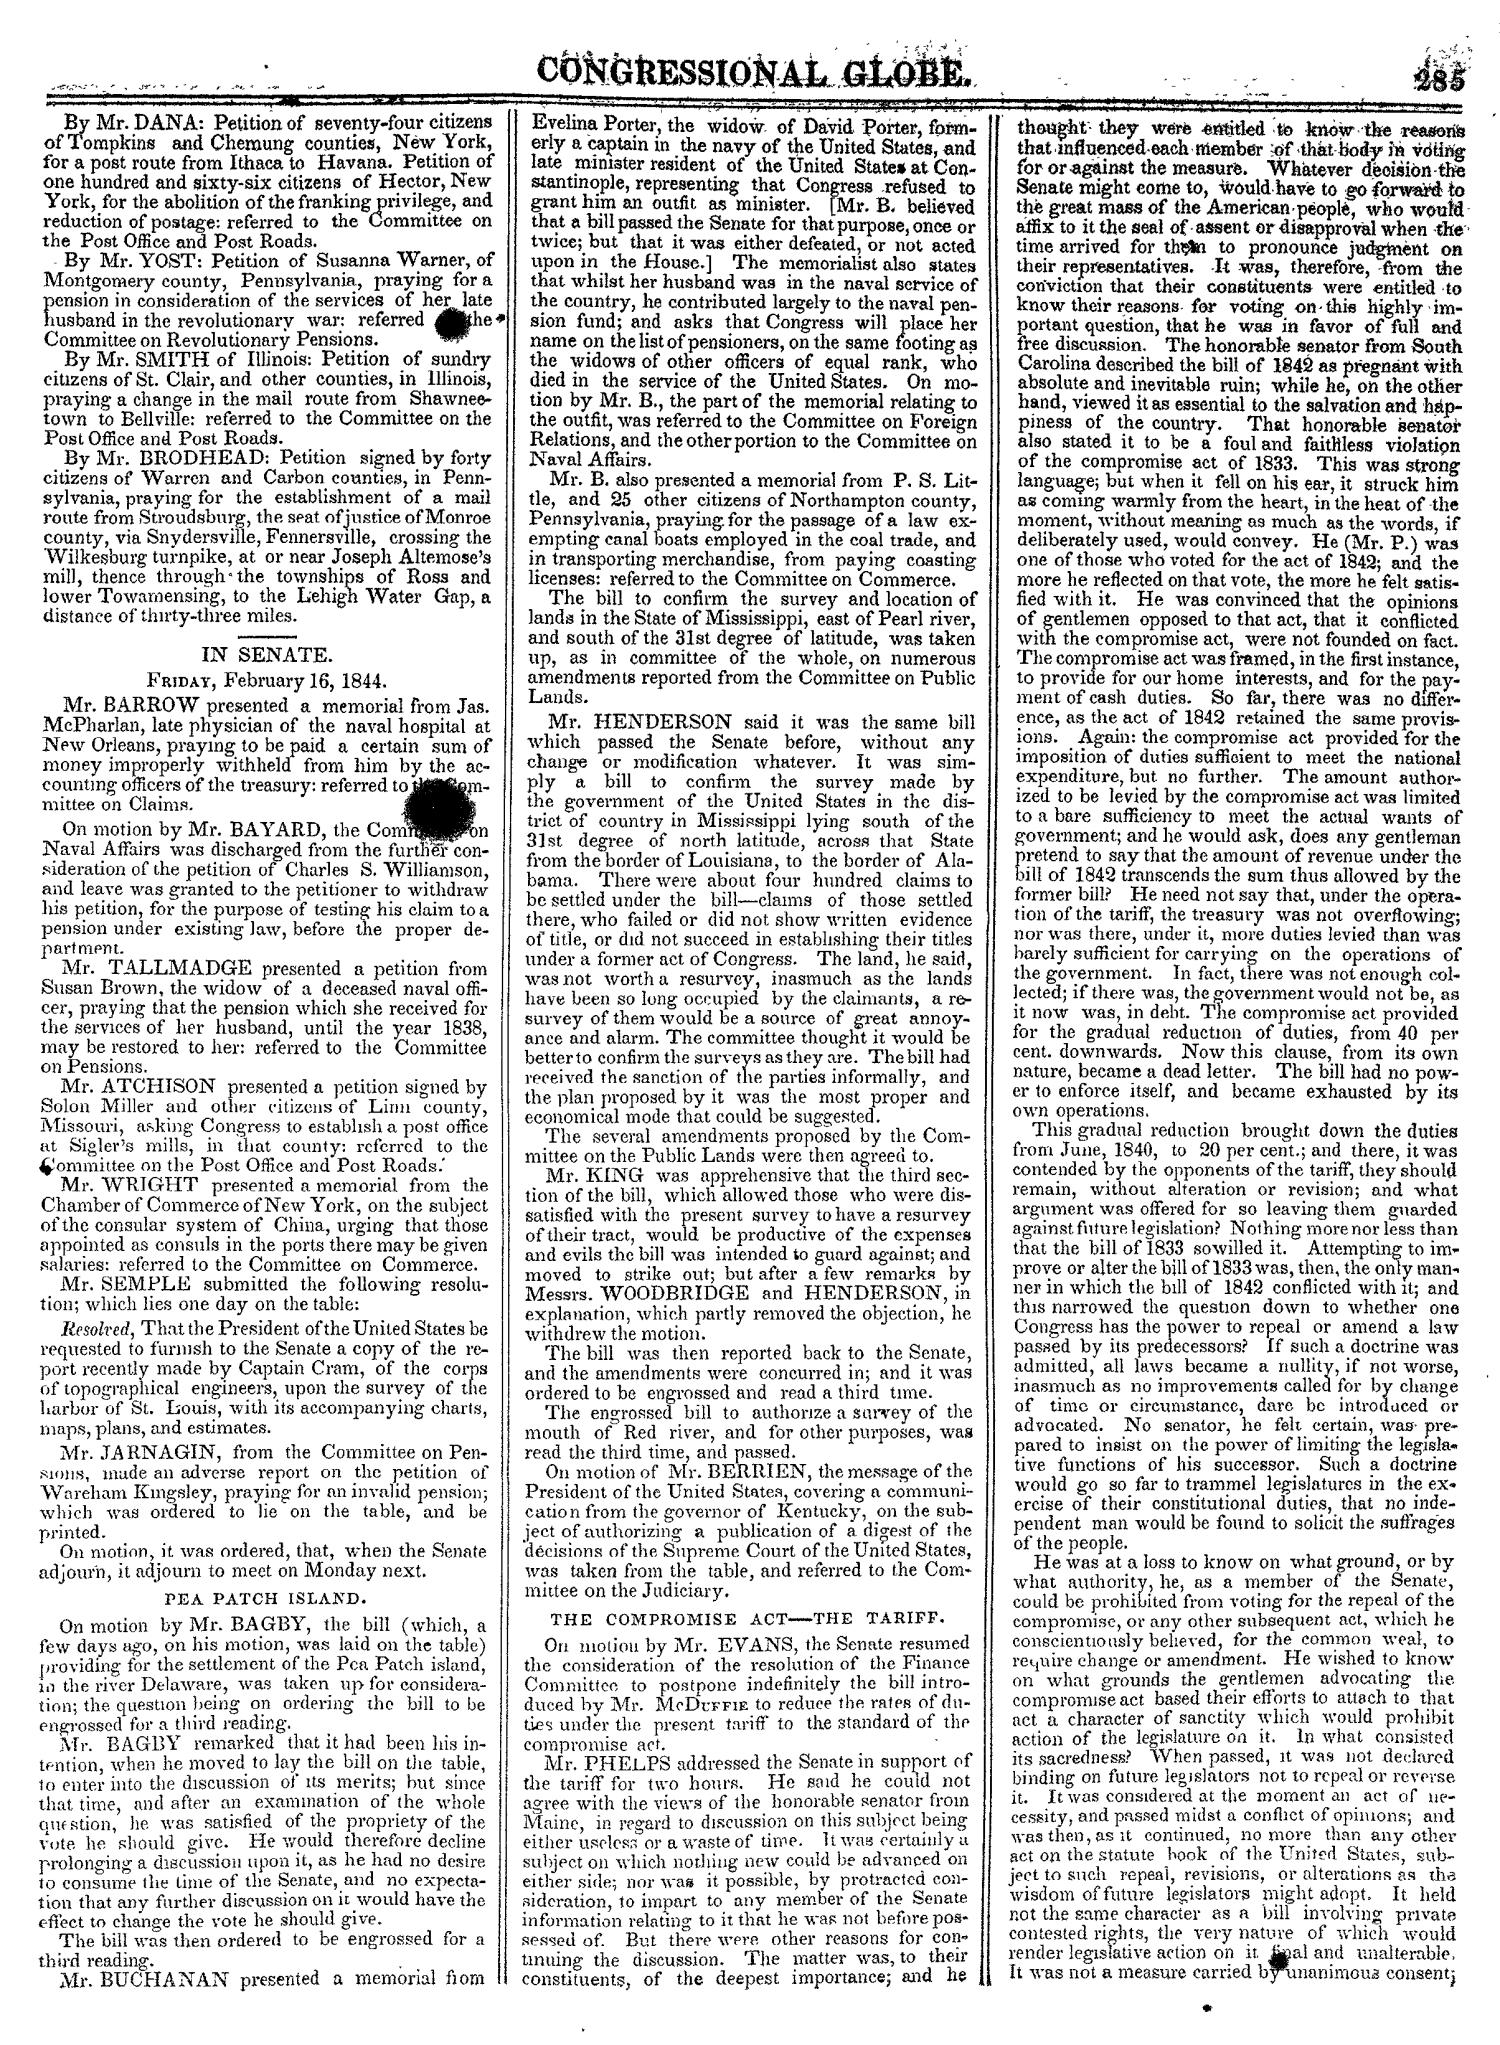 The Congressional Globe, Volume 13, Part 1: Twenty-Eighth Congress, First Session
                                                
                                                    285
                                                